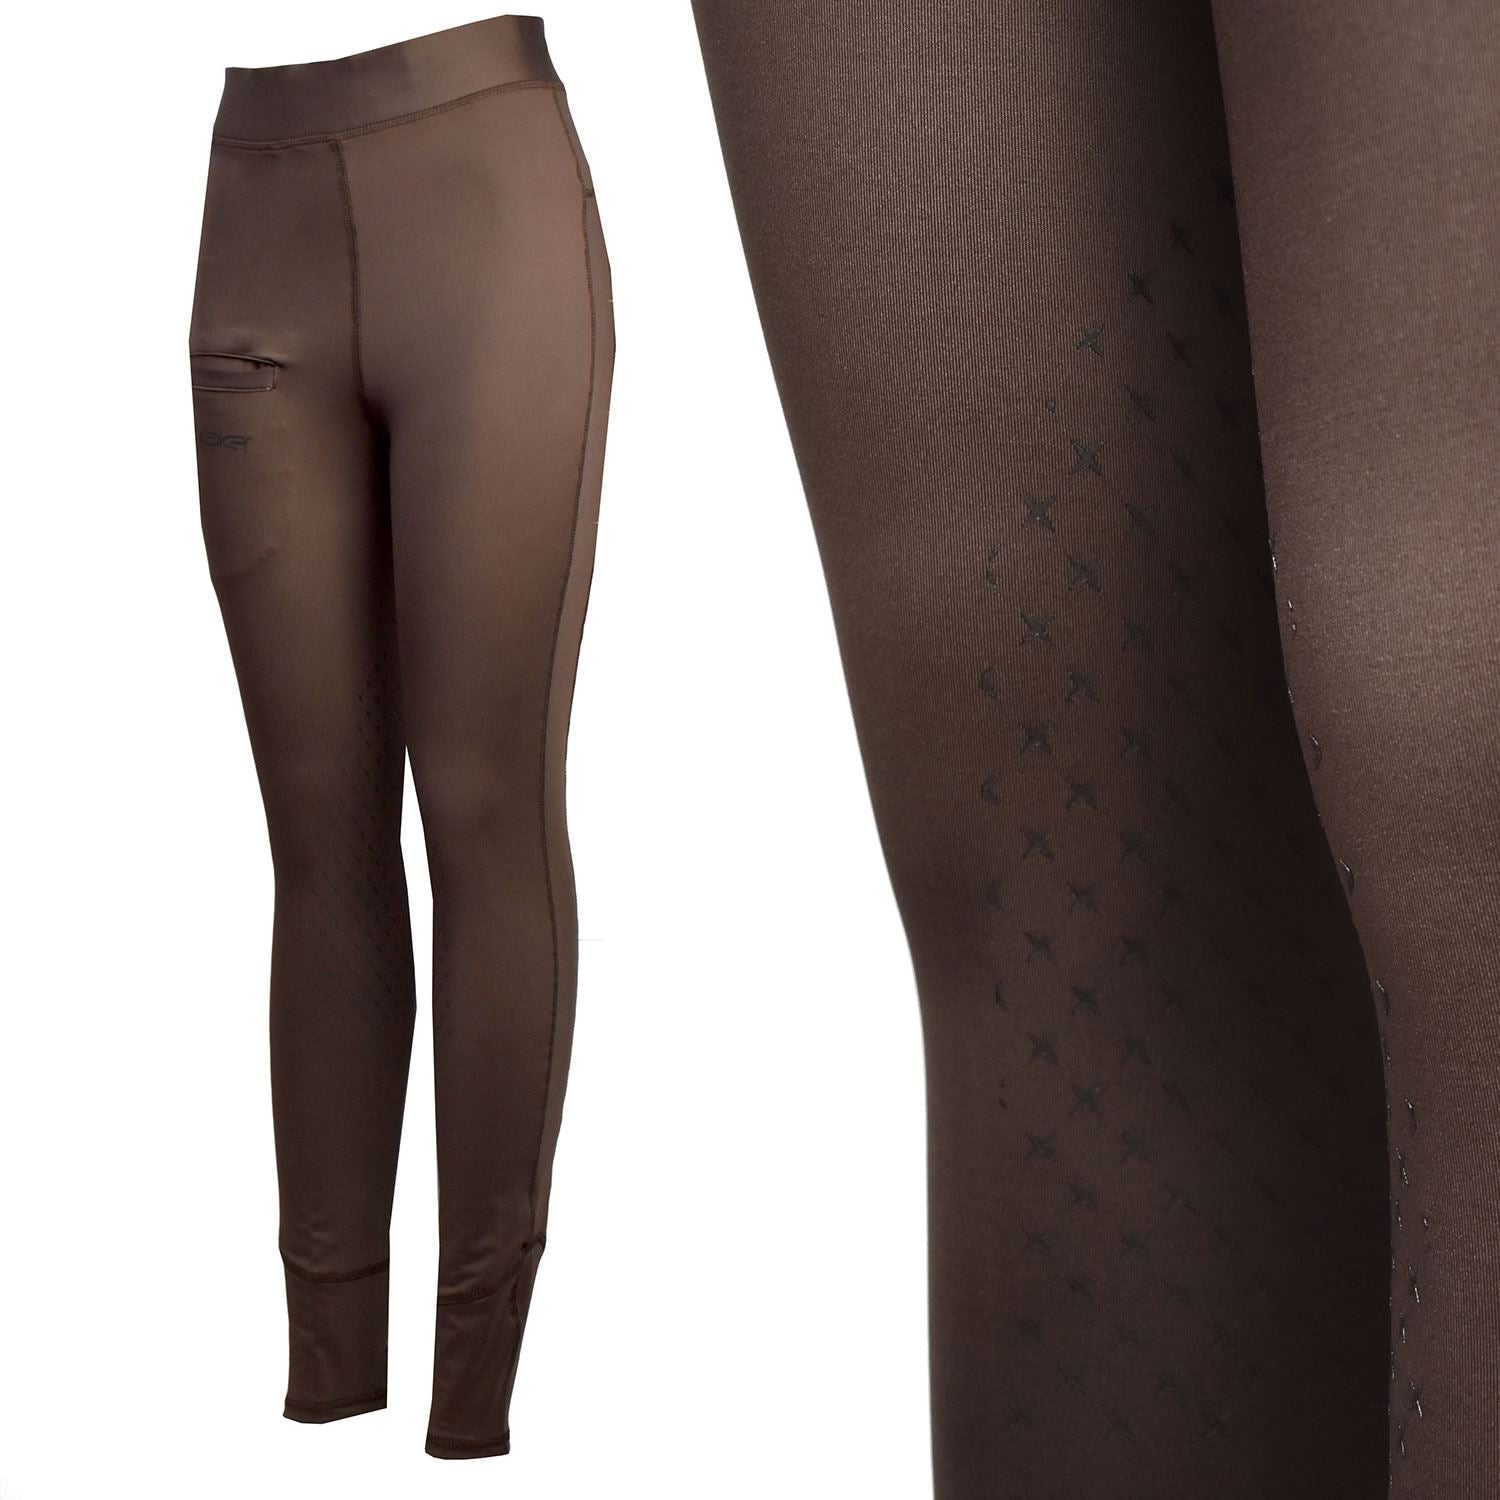 Whitaker Henshall Riding Tights - Just Horse Riders